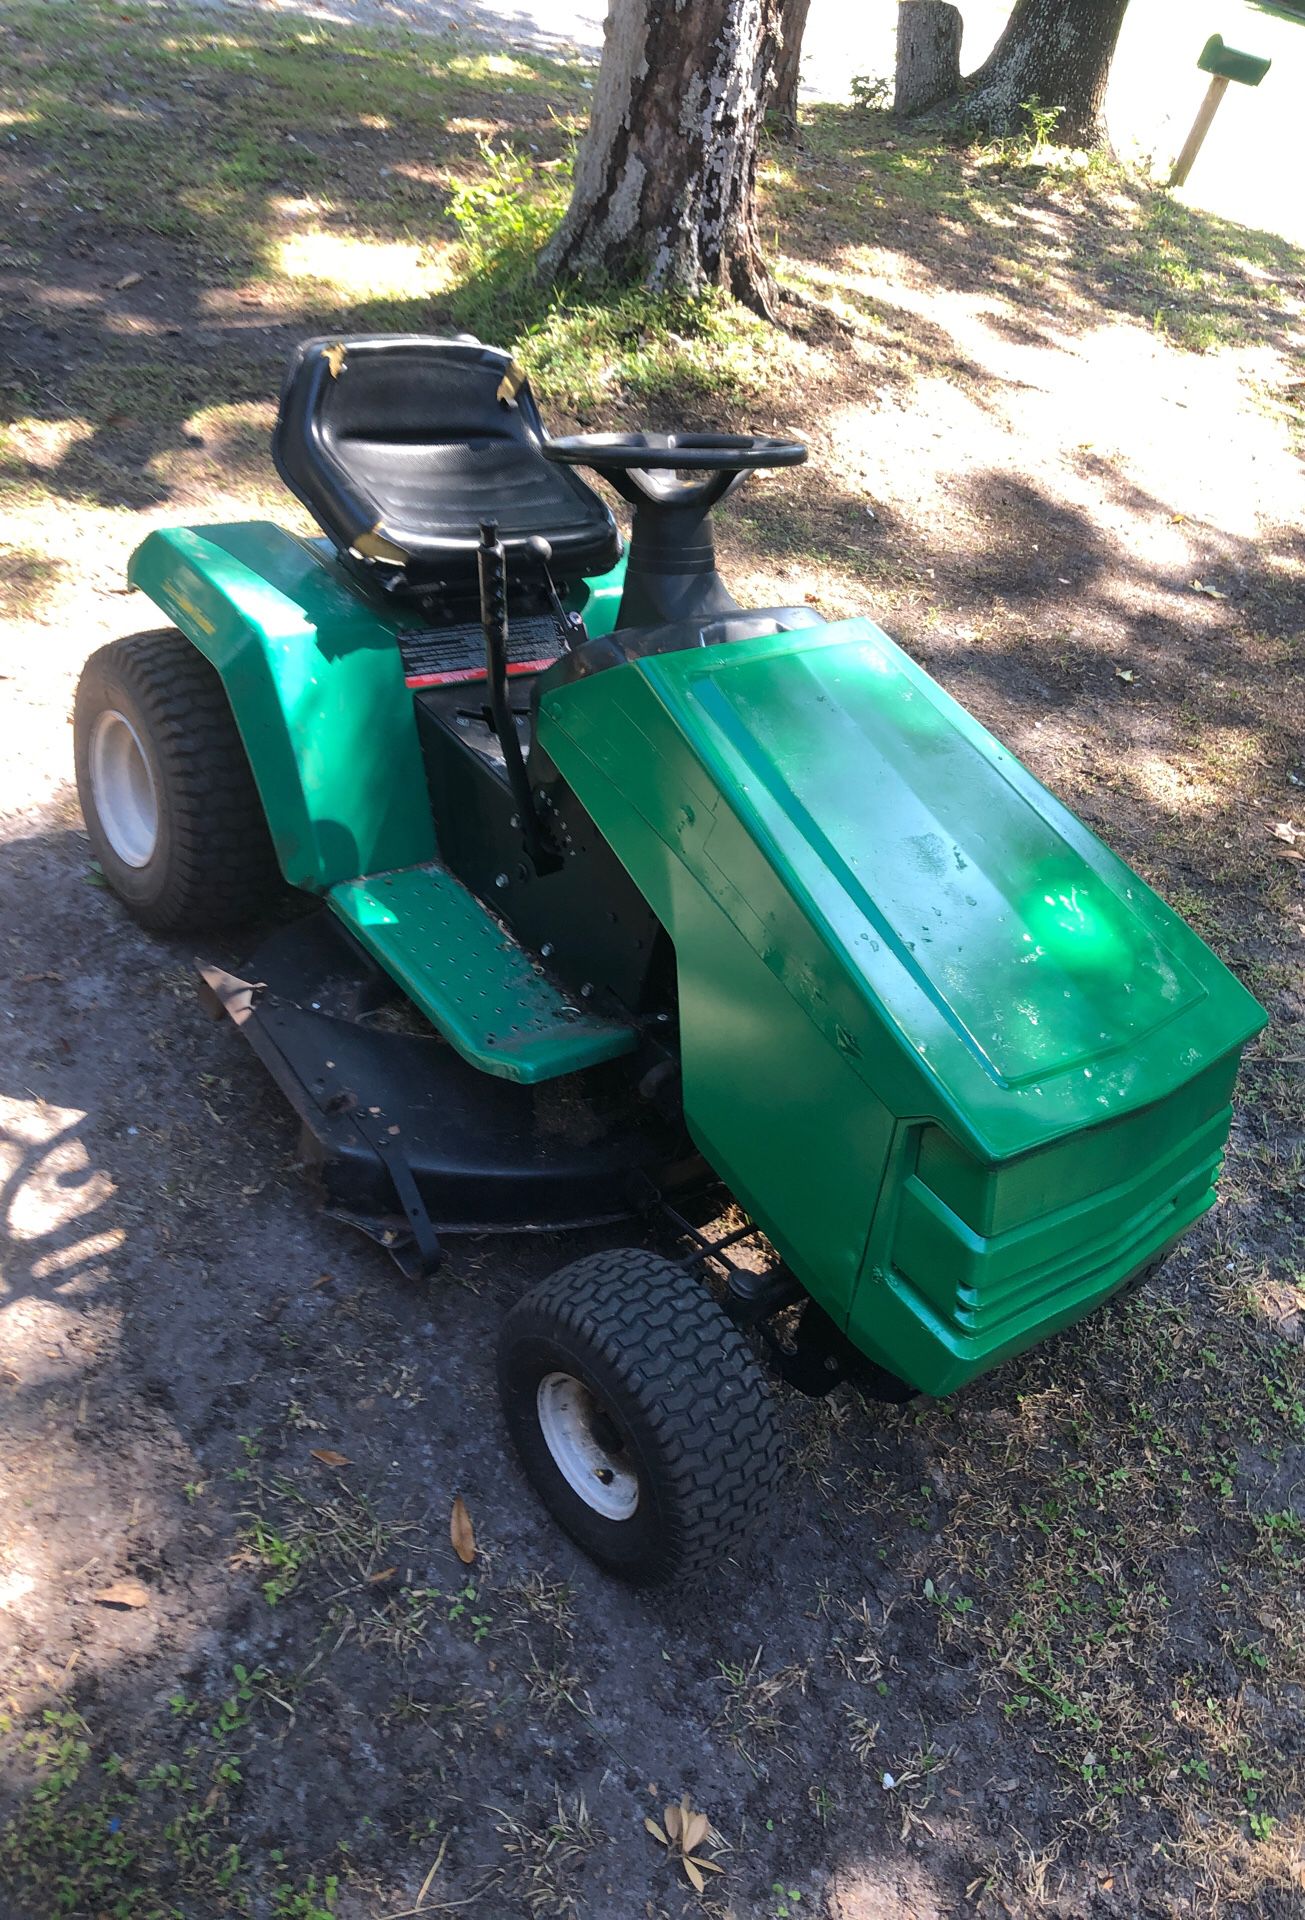 Briggs weed eater lawn tractor